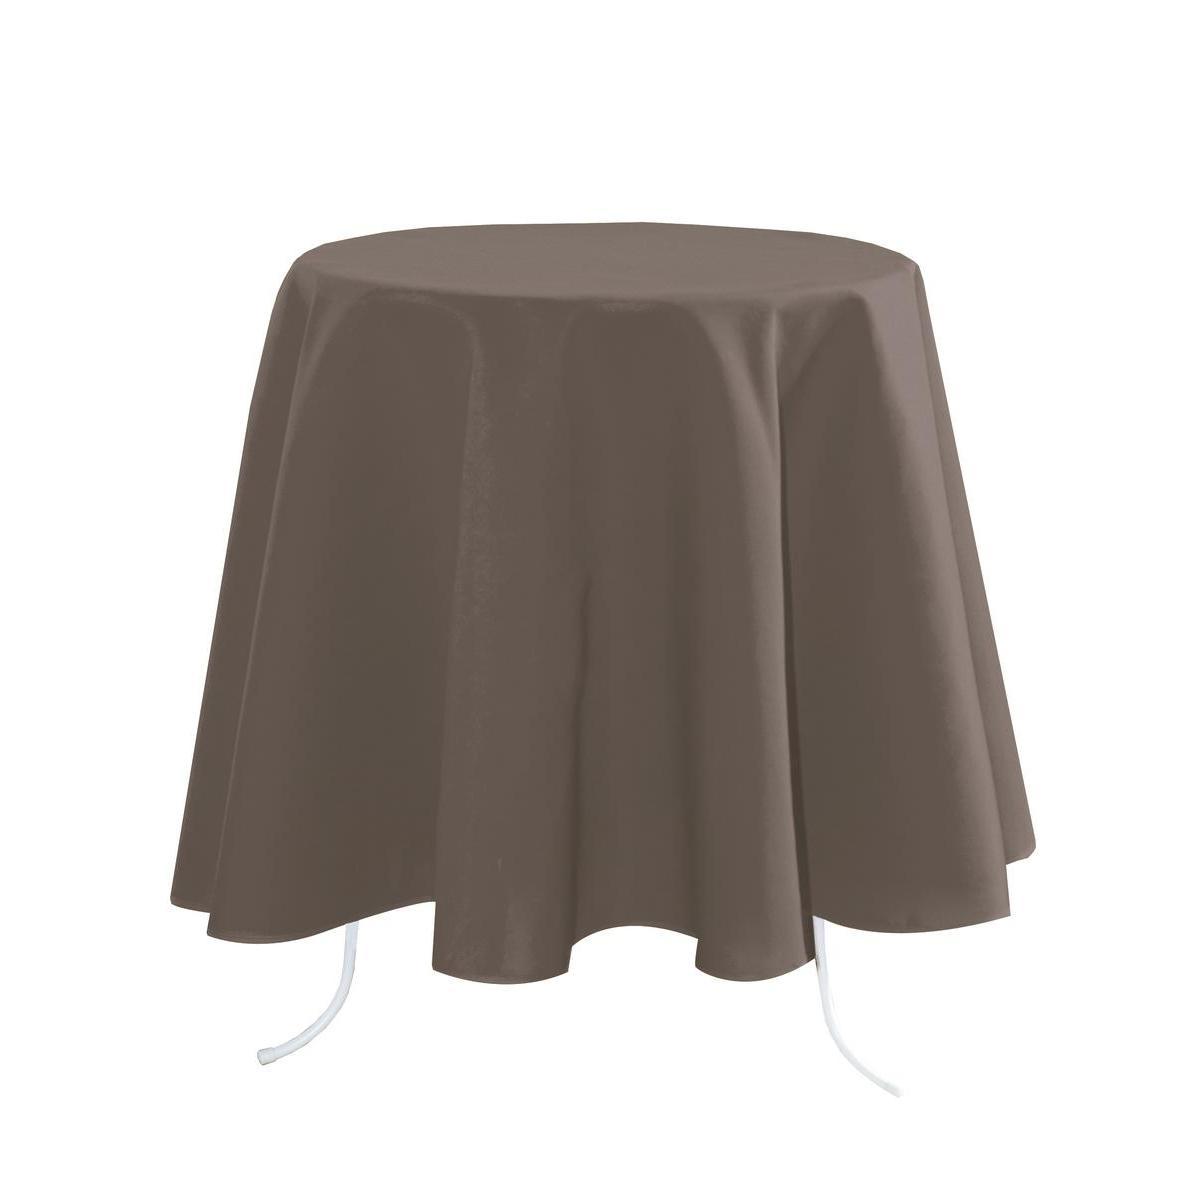 Nappe rectangulaire - 100 % Polyester - 148 x 300 cm - Marron taupe